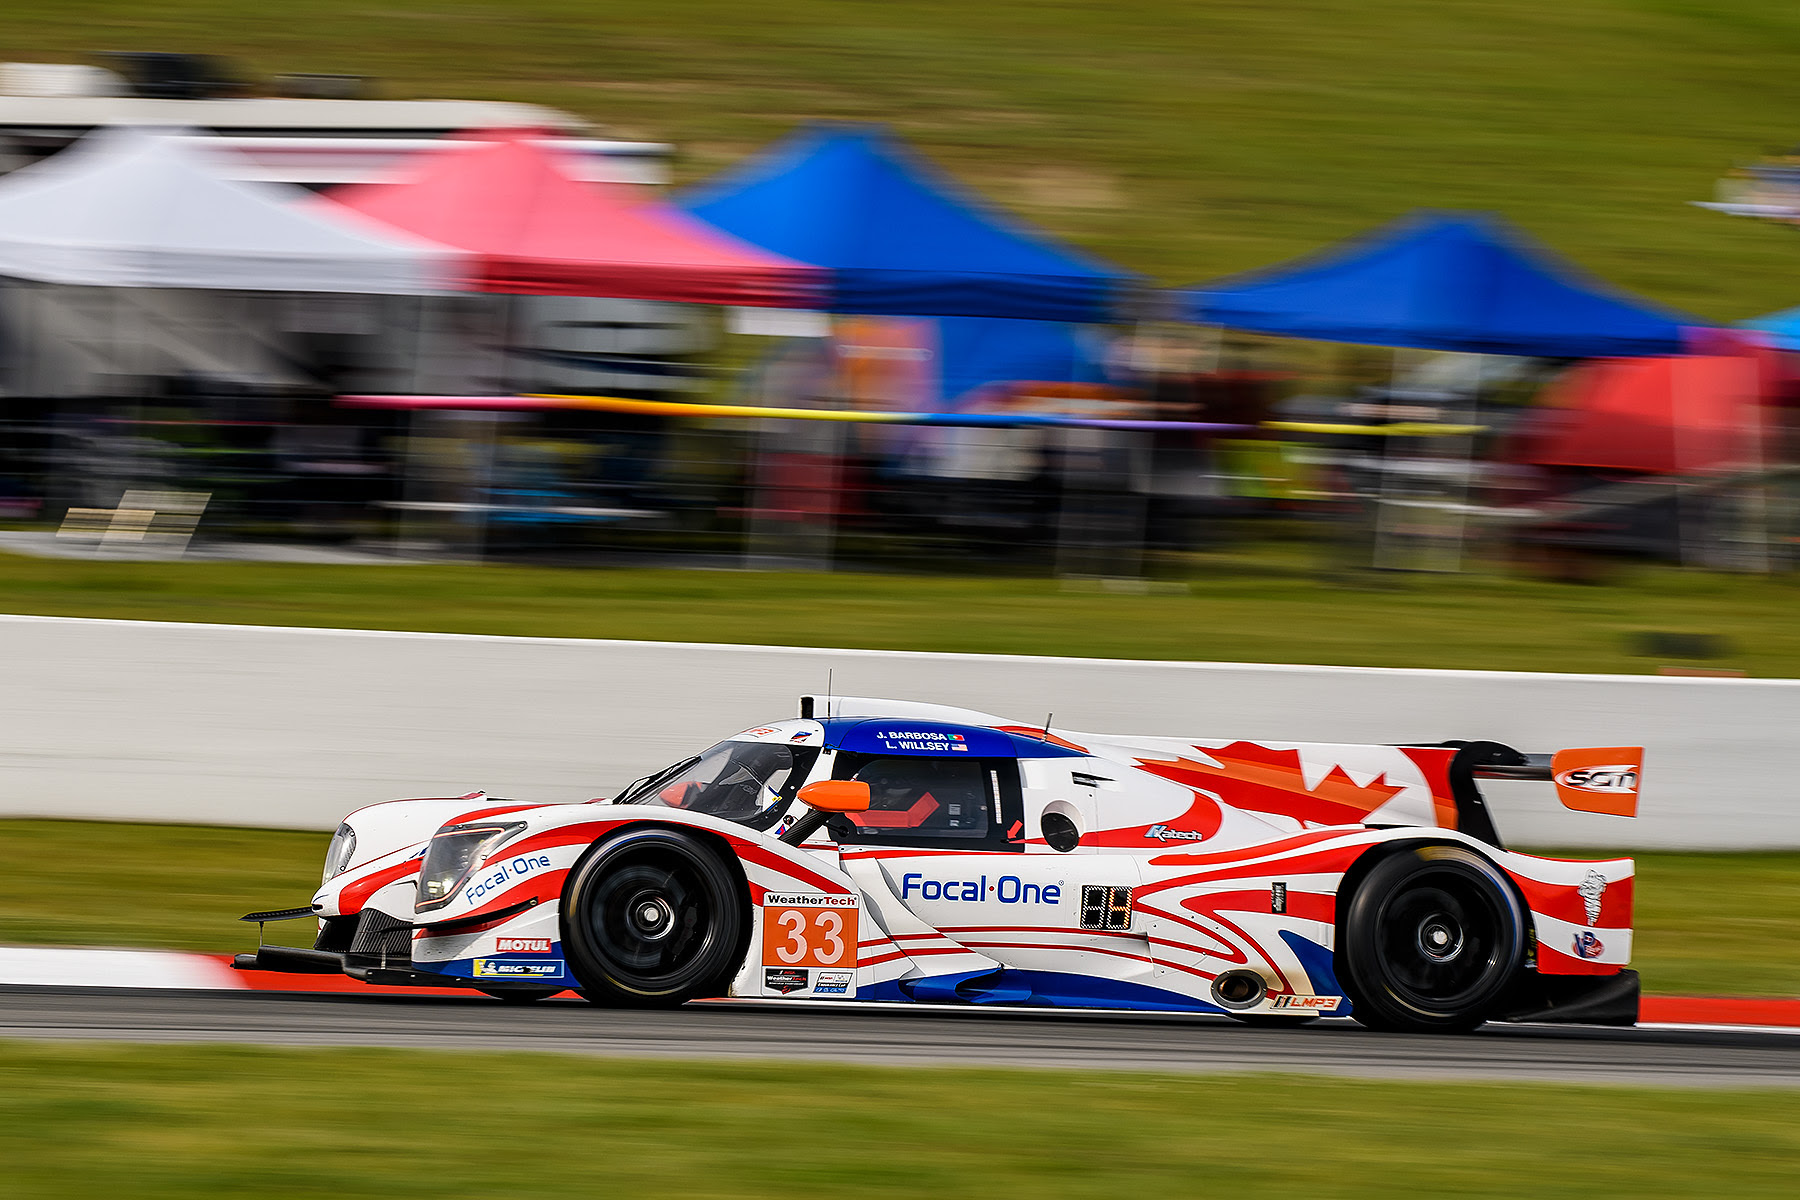 The extraordinary story behind the Sean Creech Motorsport Canadian Flag livery